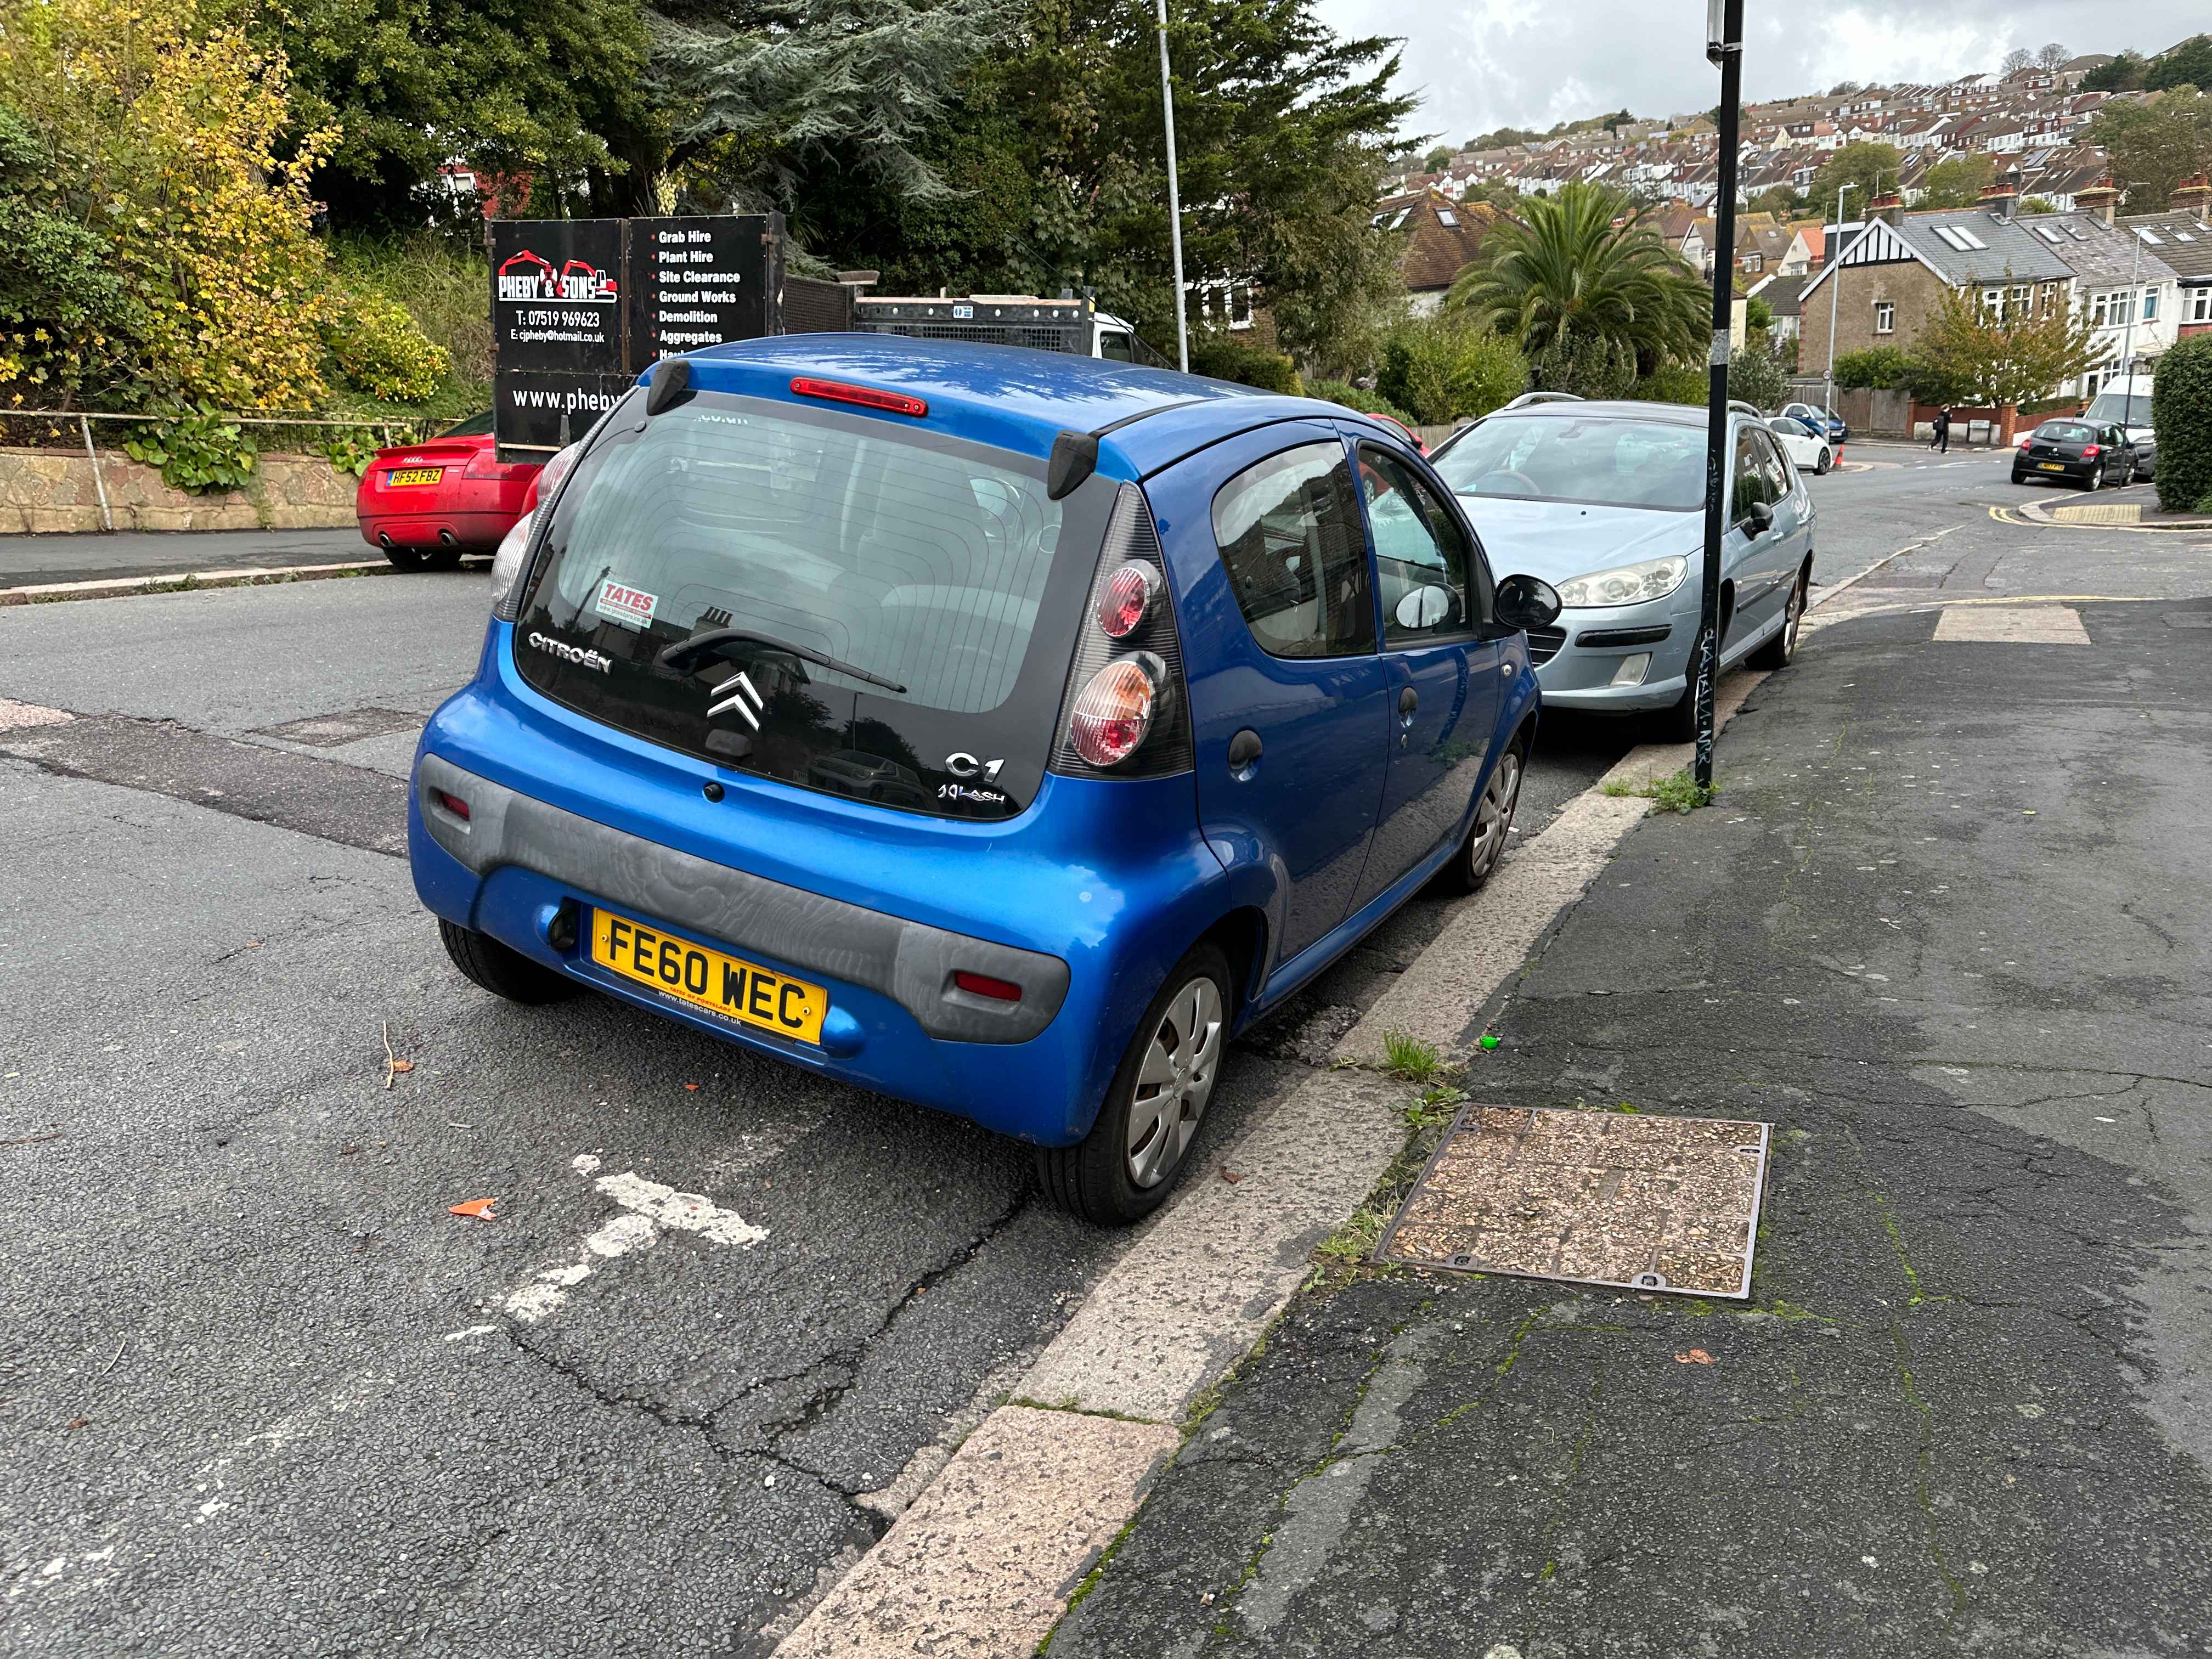 Photograph of FE60 WEC - a Blue Citroen C1 parked in Hollingdean by a non-resident. The sixth of ten photographs supplied by the residents of Hollingdean.